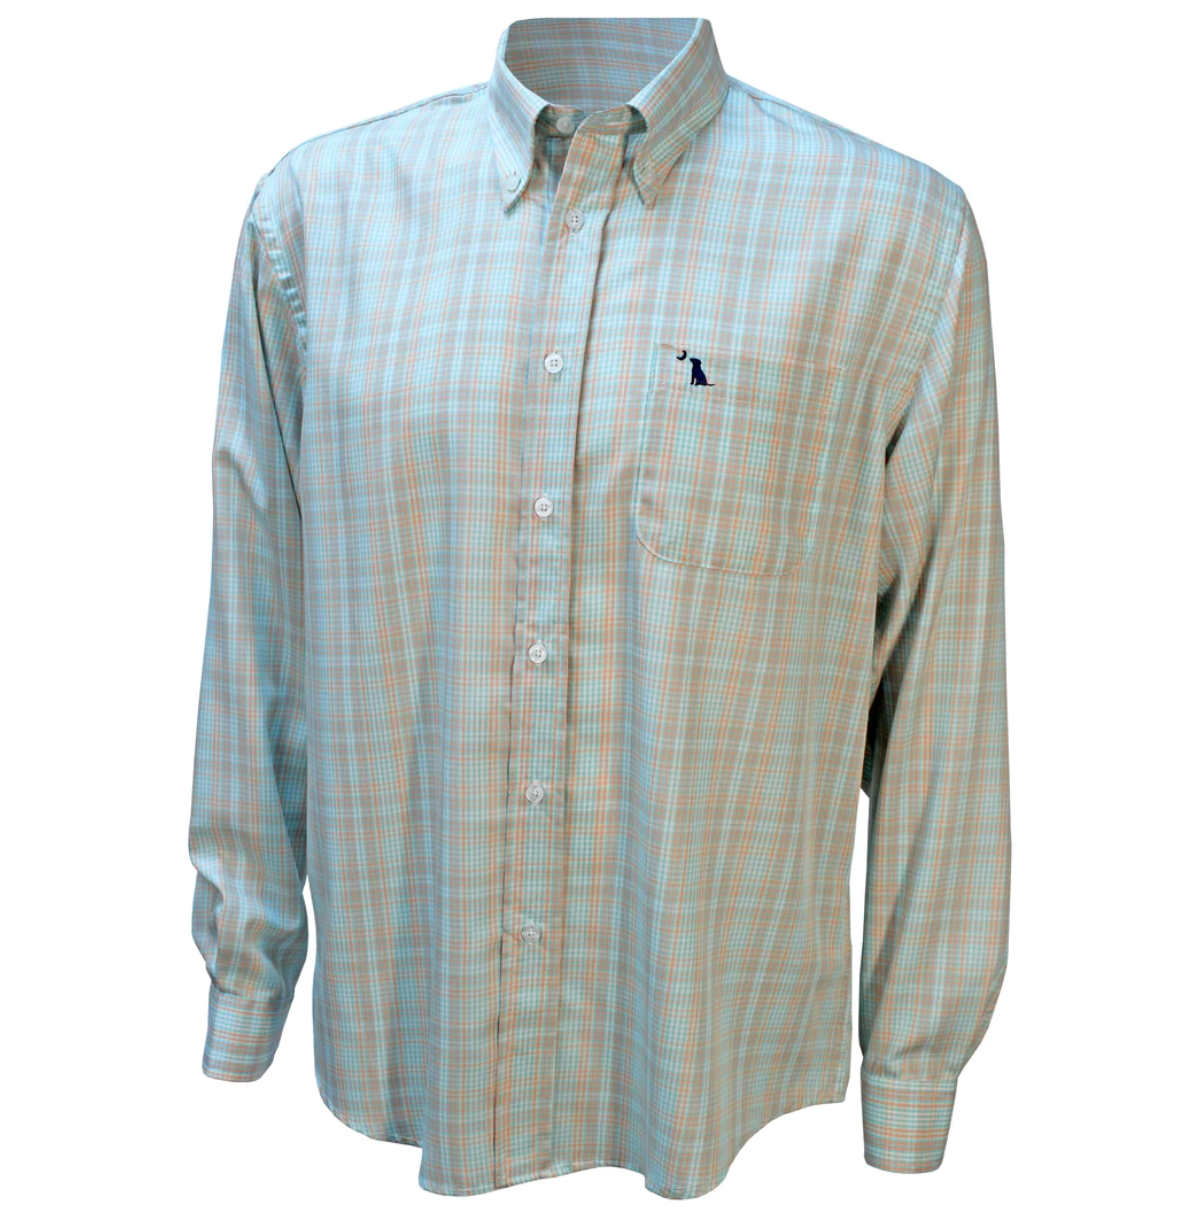 LOCAL BOY OUTFITTERS BAILEY DRESS SHIRT SALMON/SAGE/BLUE***